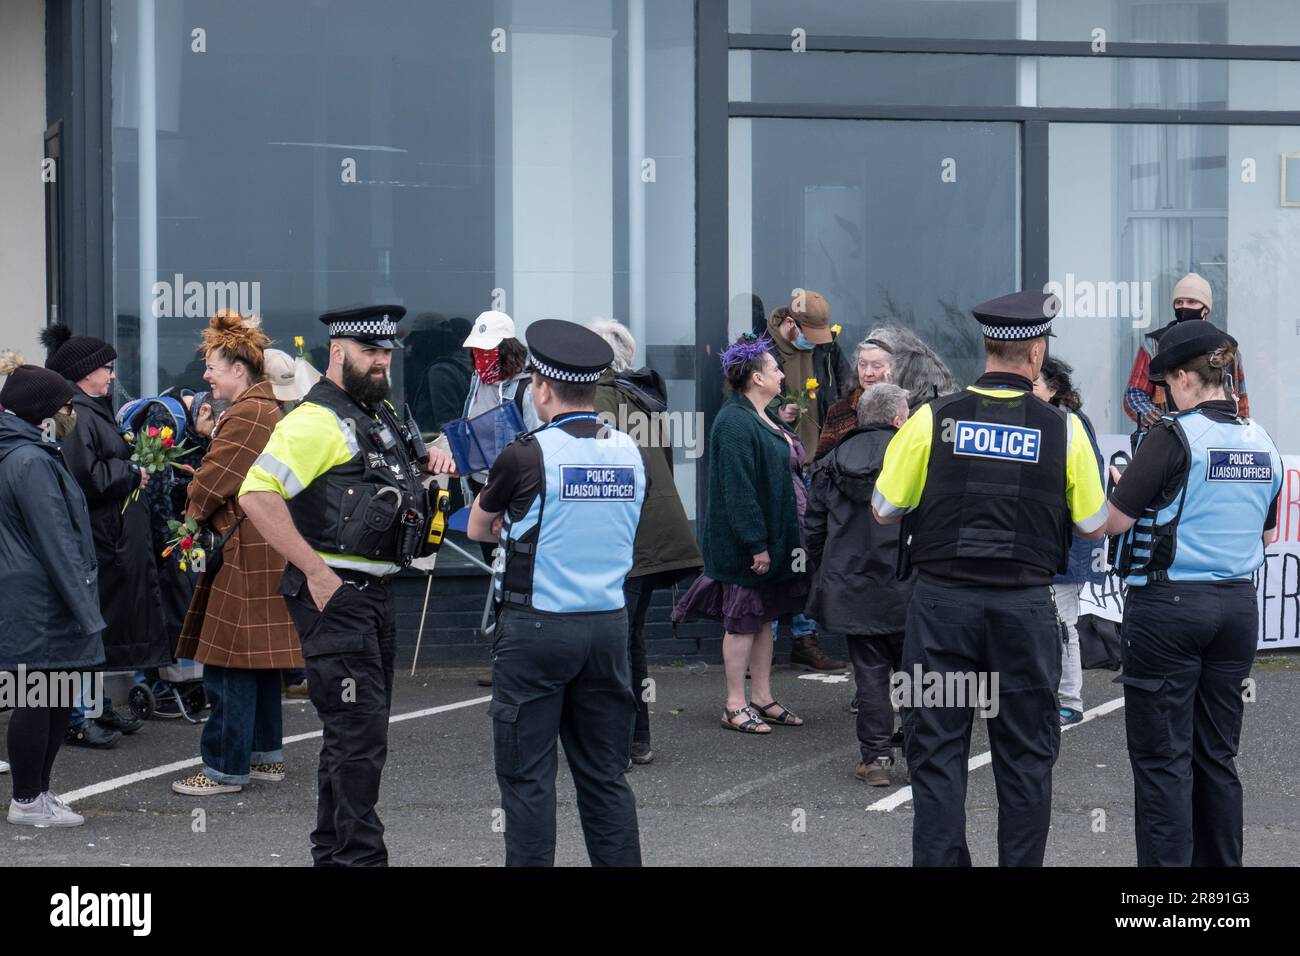 Devon and Cornwall Police Officers policing a demonstration in support of asylum seekers living temporarily at the Beresford Hotel in Newquay in Cornw Stock Photo